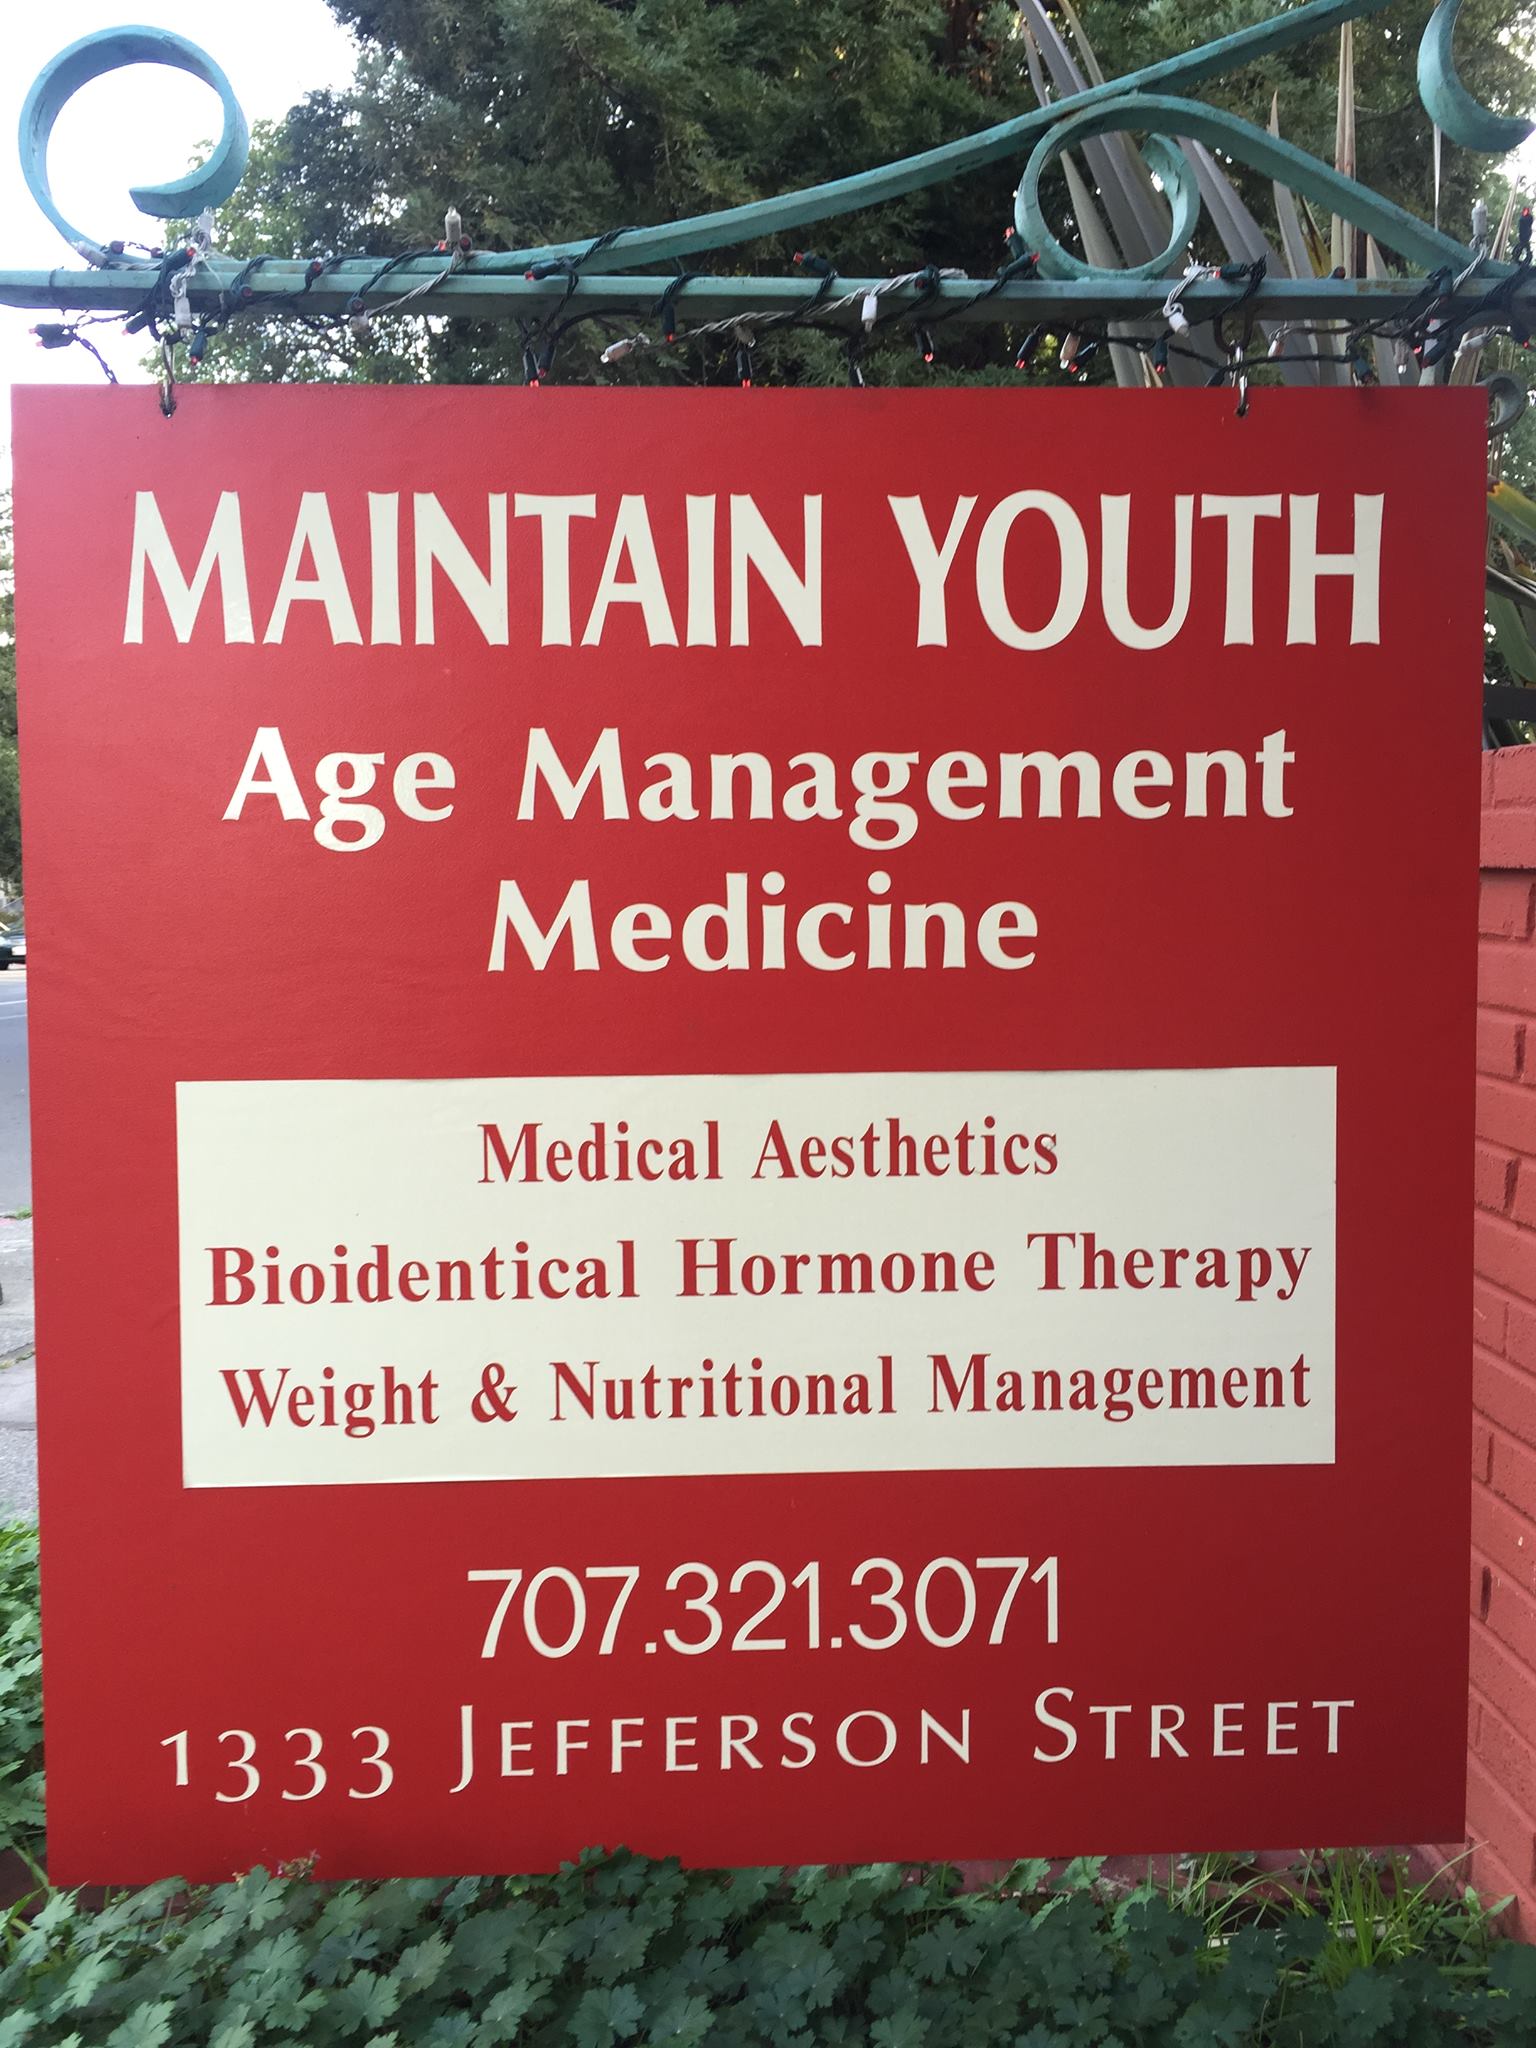 Maintain Youth Age Management Medicine